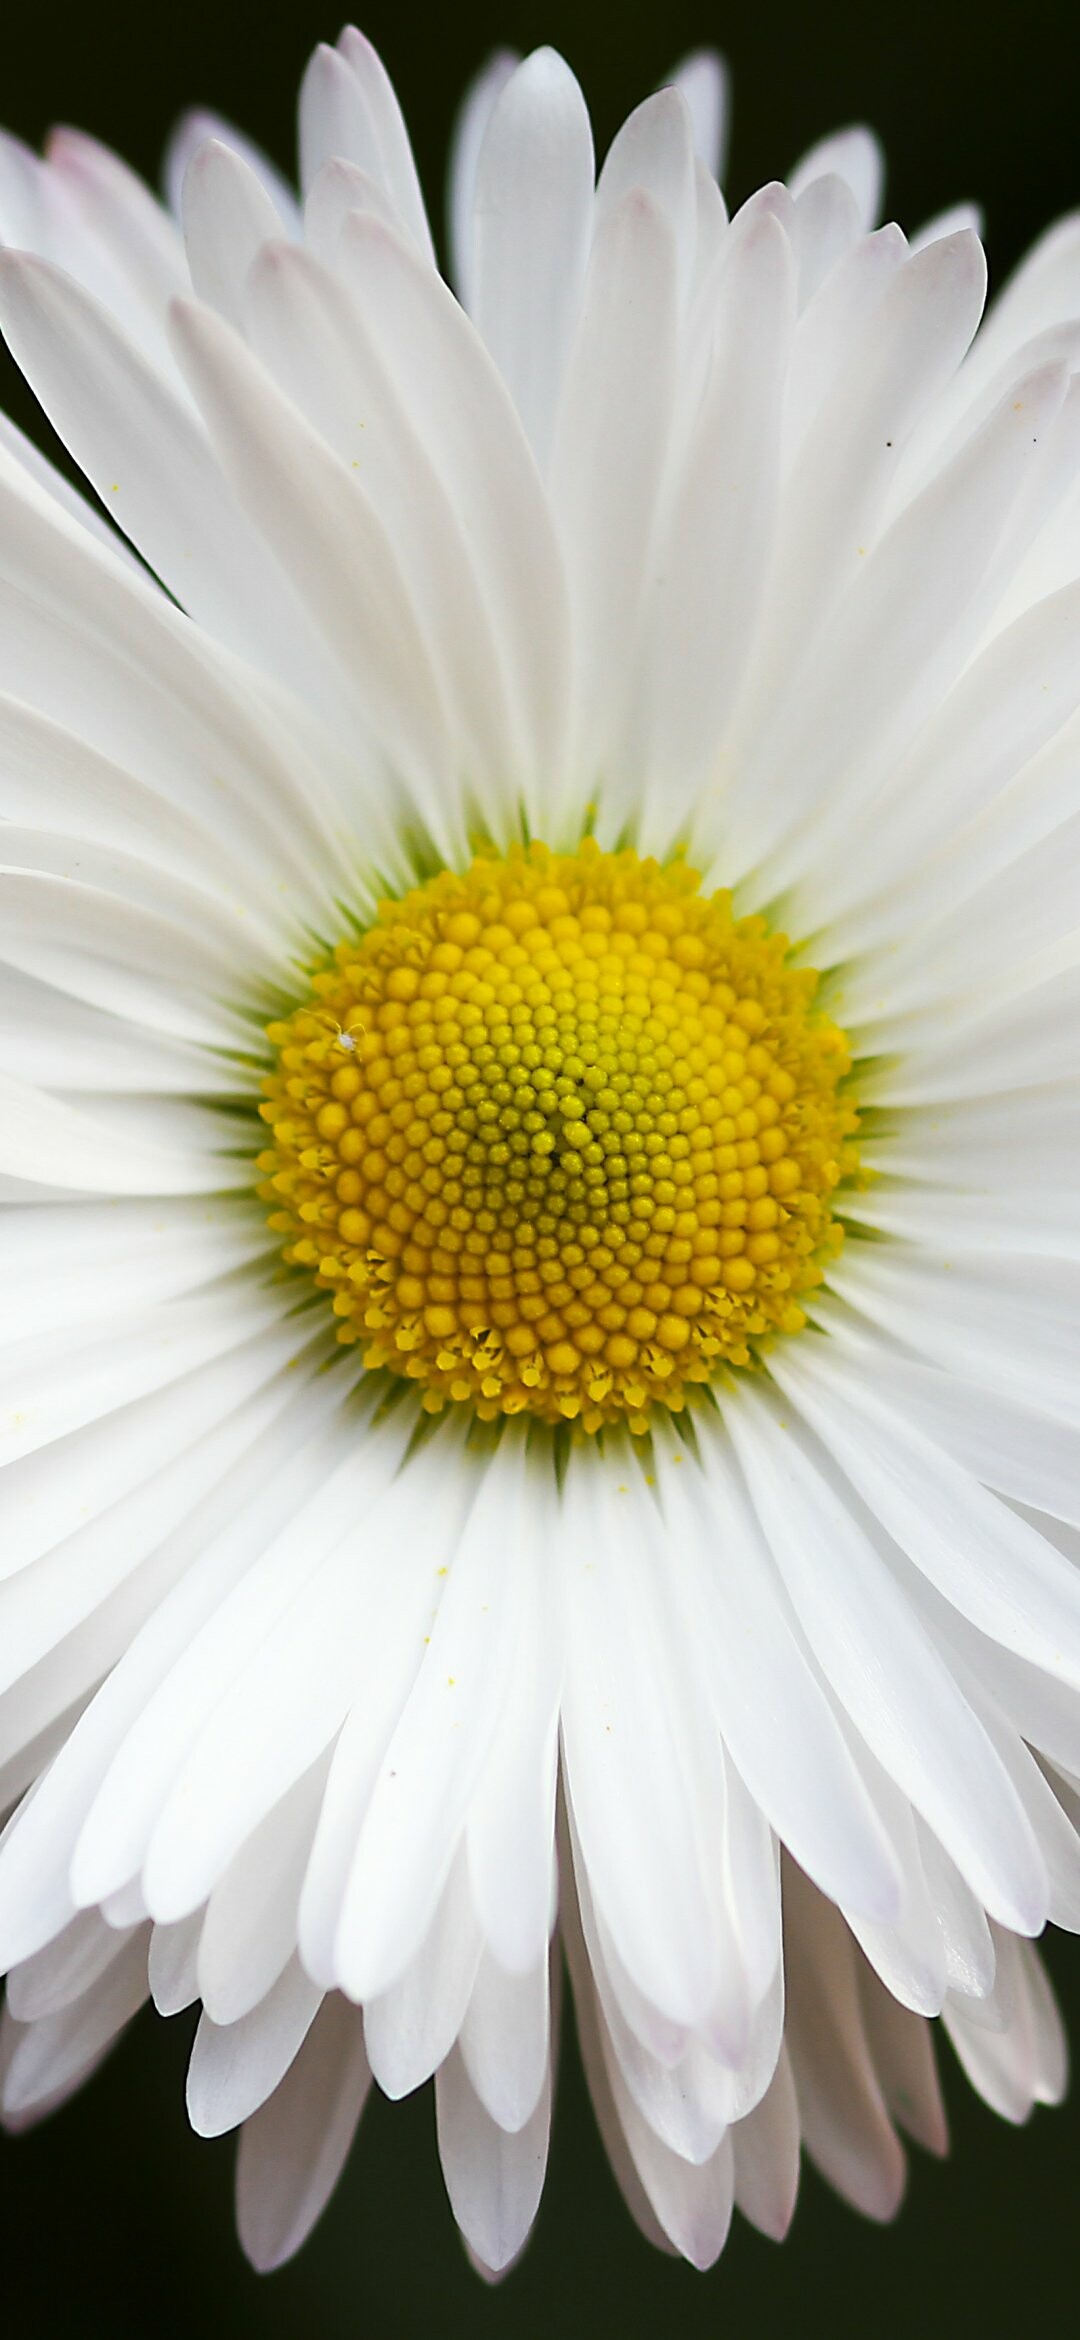 HD wallpaper, 1080X2340 Hd Phone, Natural Serenity, Blooming Flora, Mobile Hd Daisy Background Image, Daisy Flower